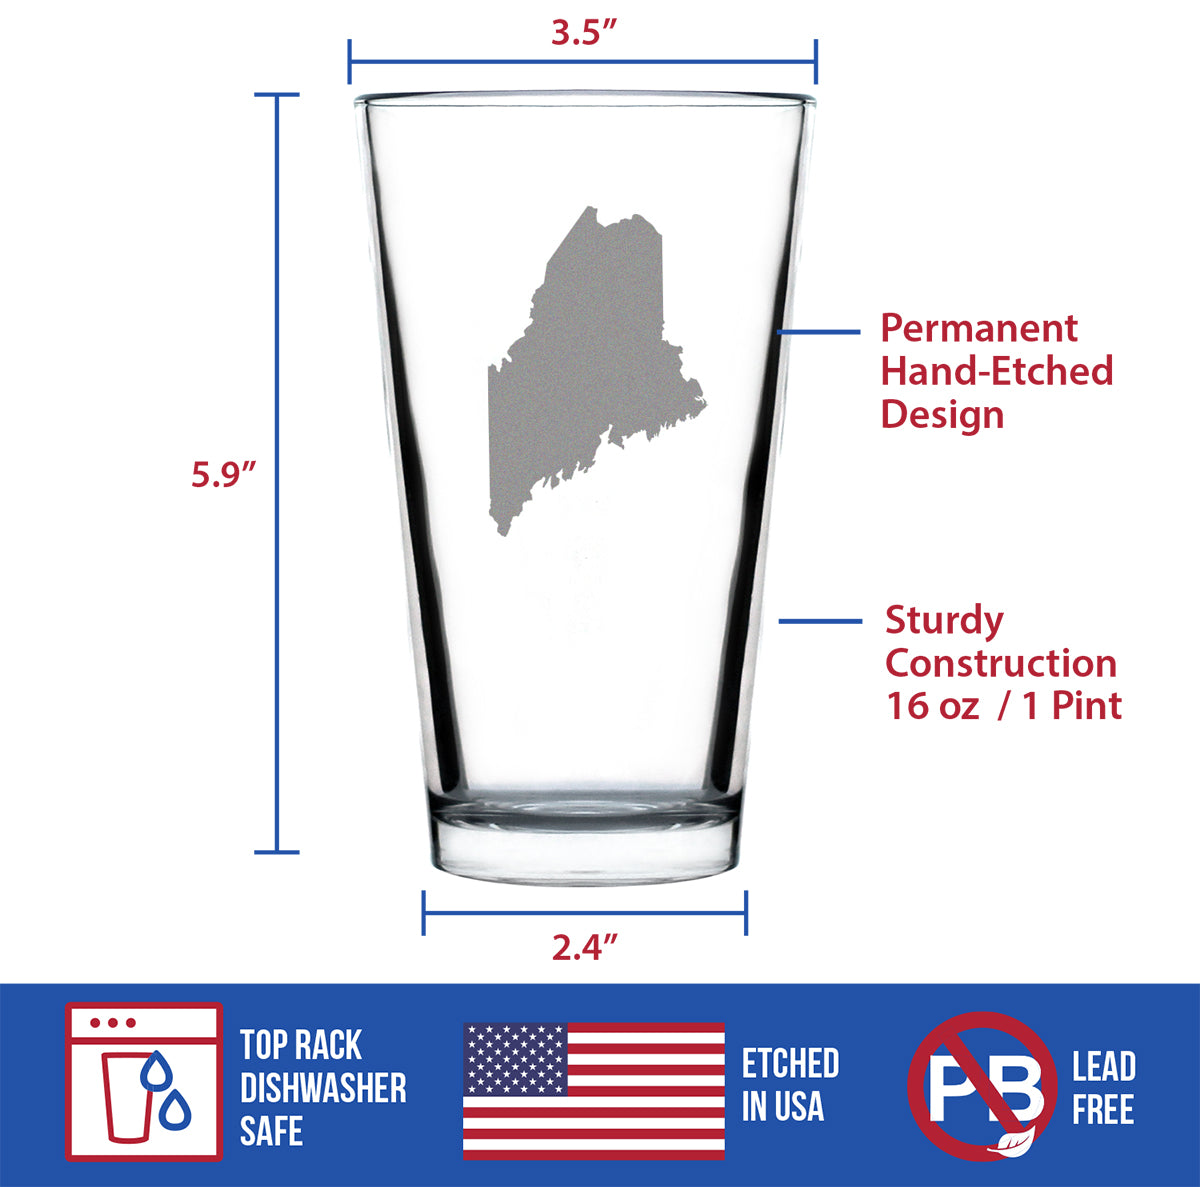 Maine State Outline Pint Glass for Beer - State Themed Drinking Decor and Gifts for Mainer Women &amp; Men - 16 Oz Glasses